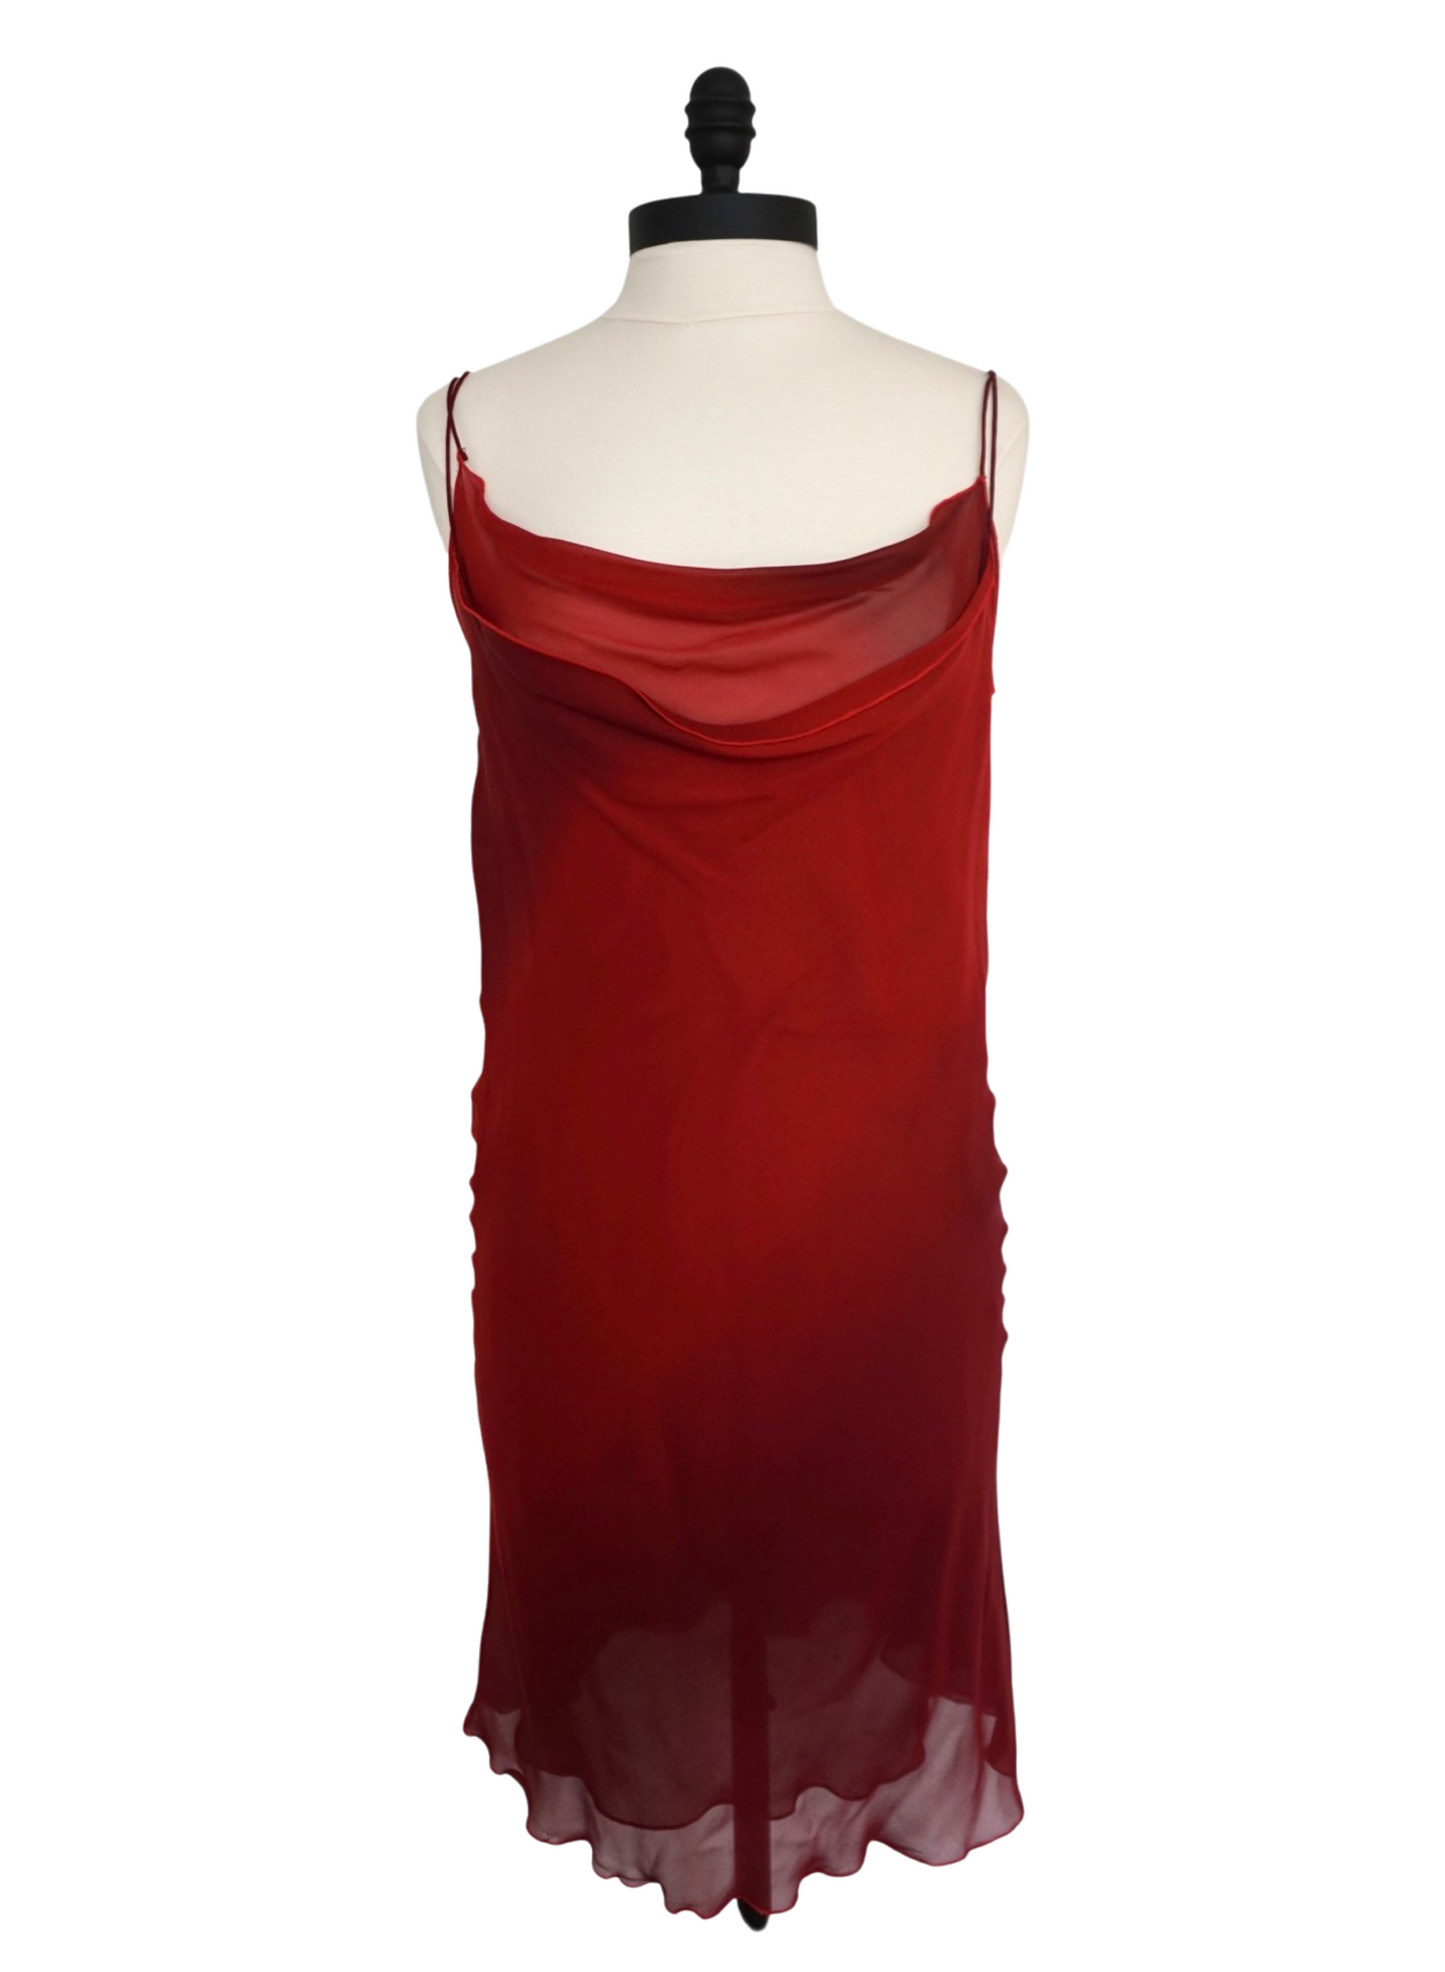 Gucci by Tom Ford SS 1997 Red Sheer Slip Dress (Runway)